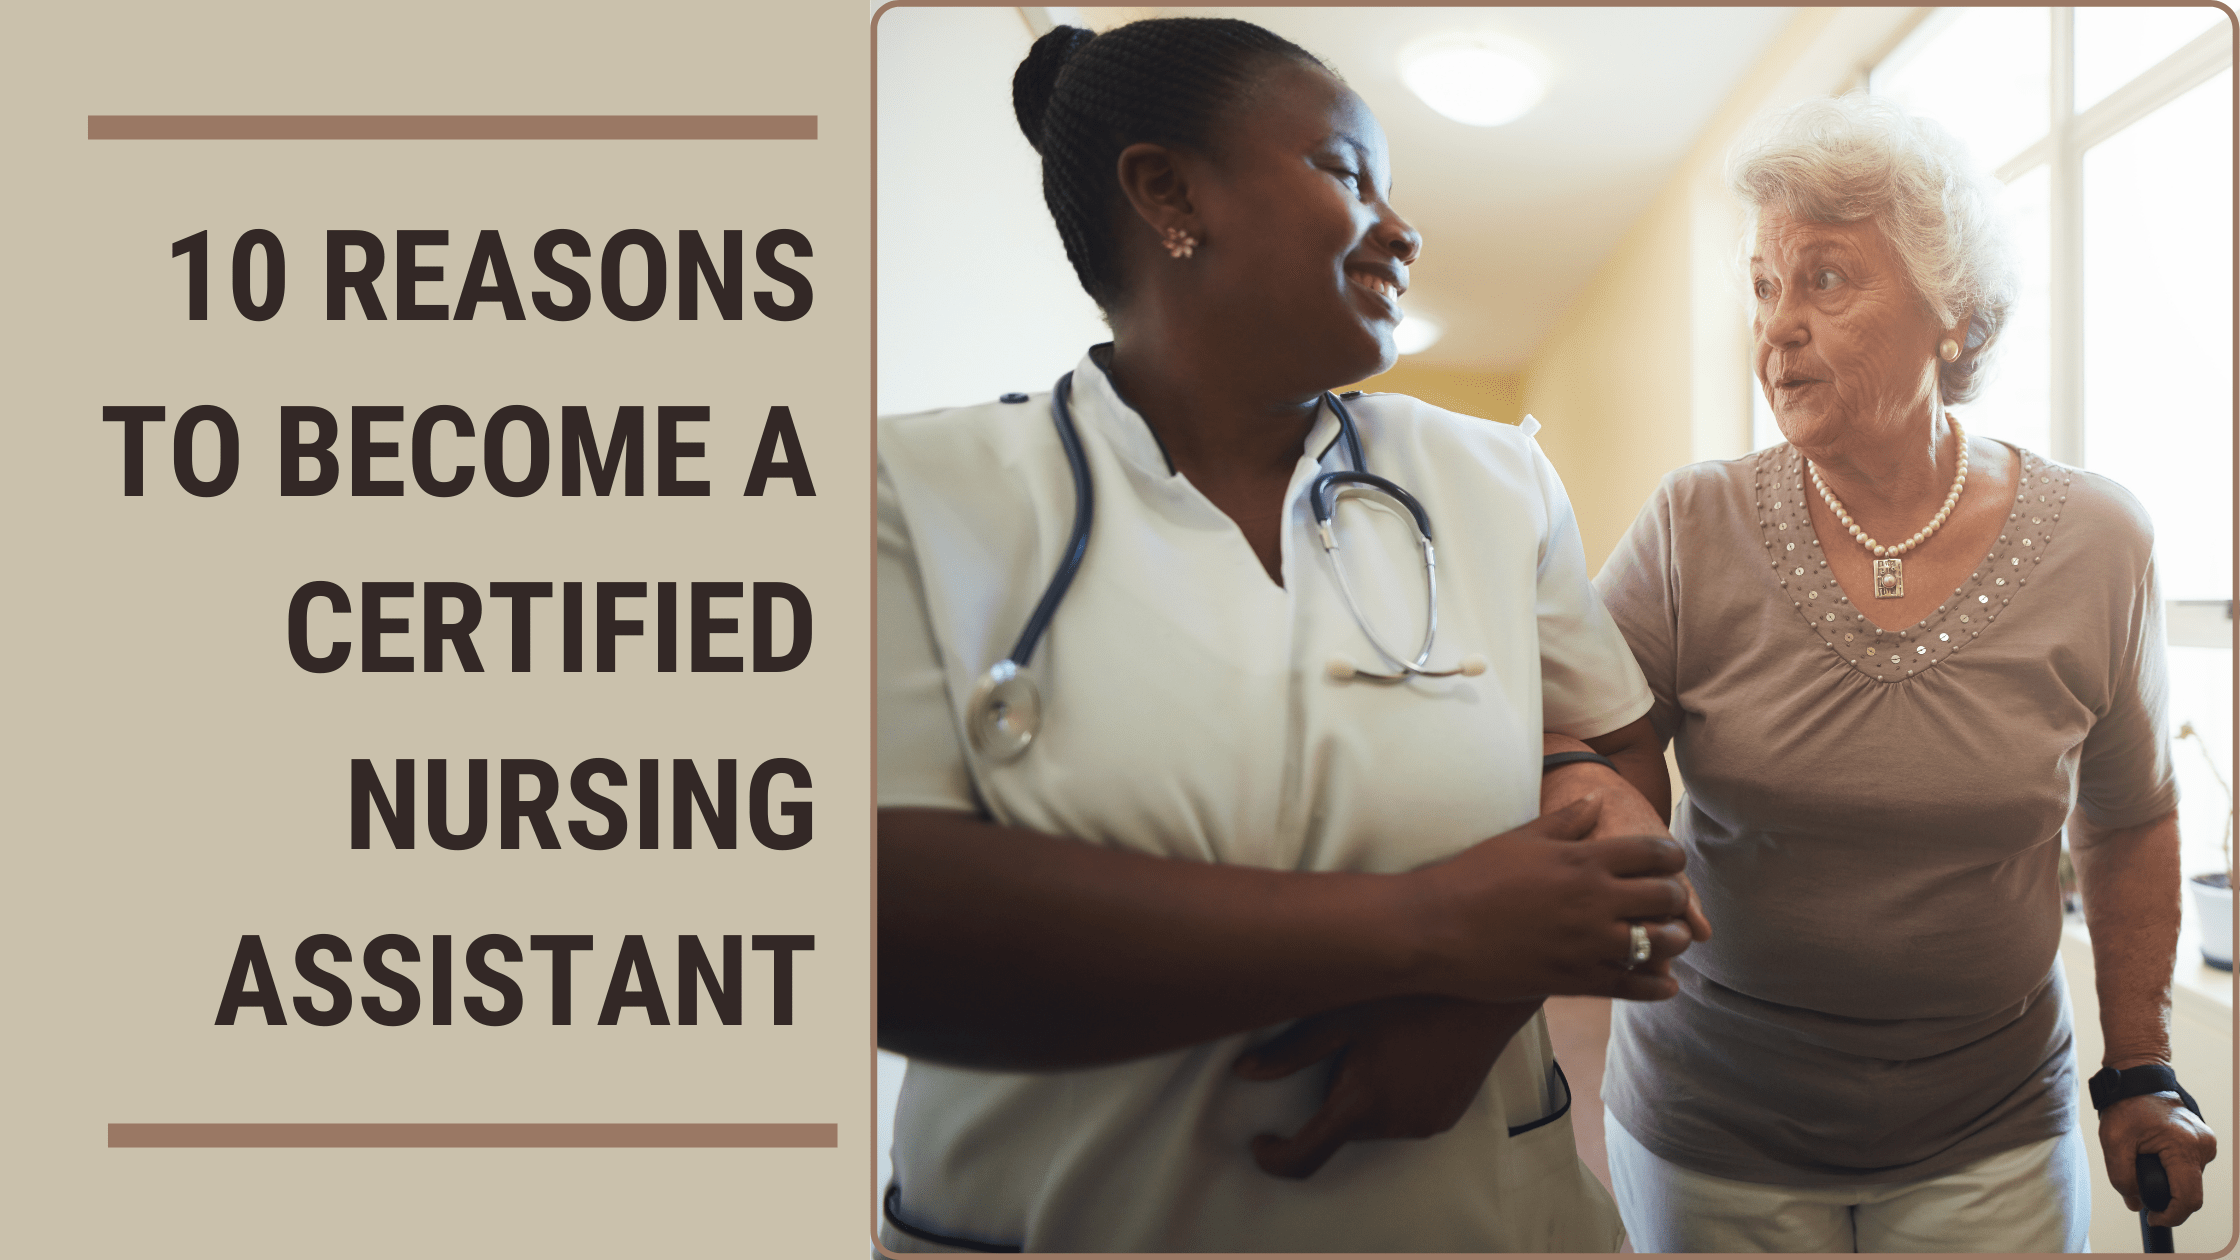 10-reasons-to-become-a-certified-nursing-assistant-blog-banner